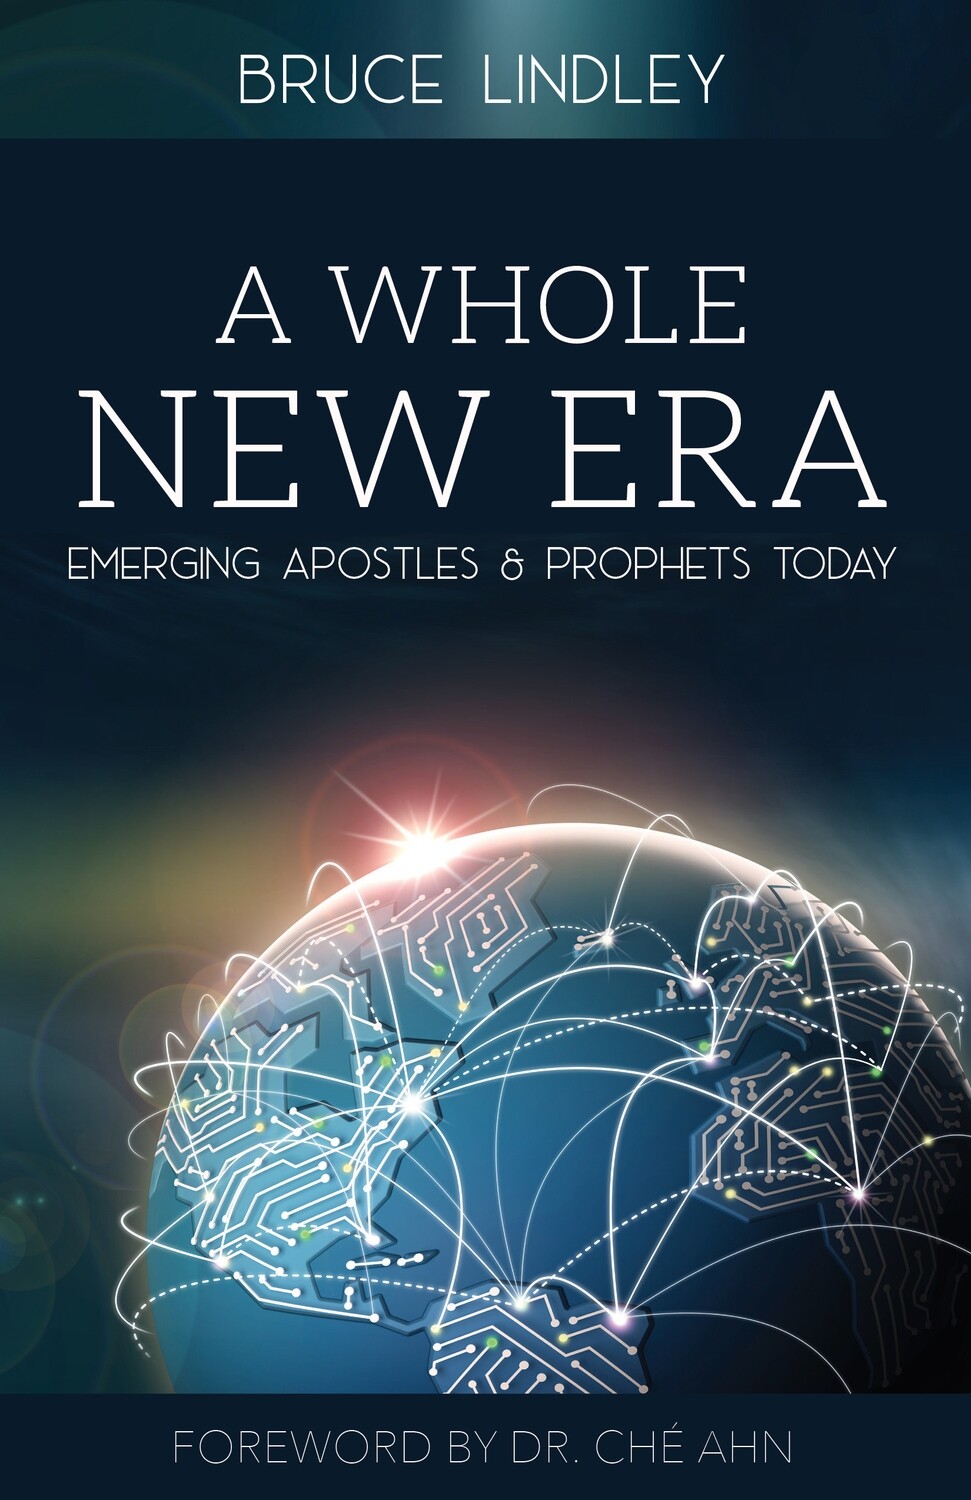 NEW e BOOK - Bruce Lindley's
"A Whole New Era - Emerging Apostles & Prophets Today" - Forward by Dr. Che Ahn